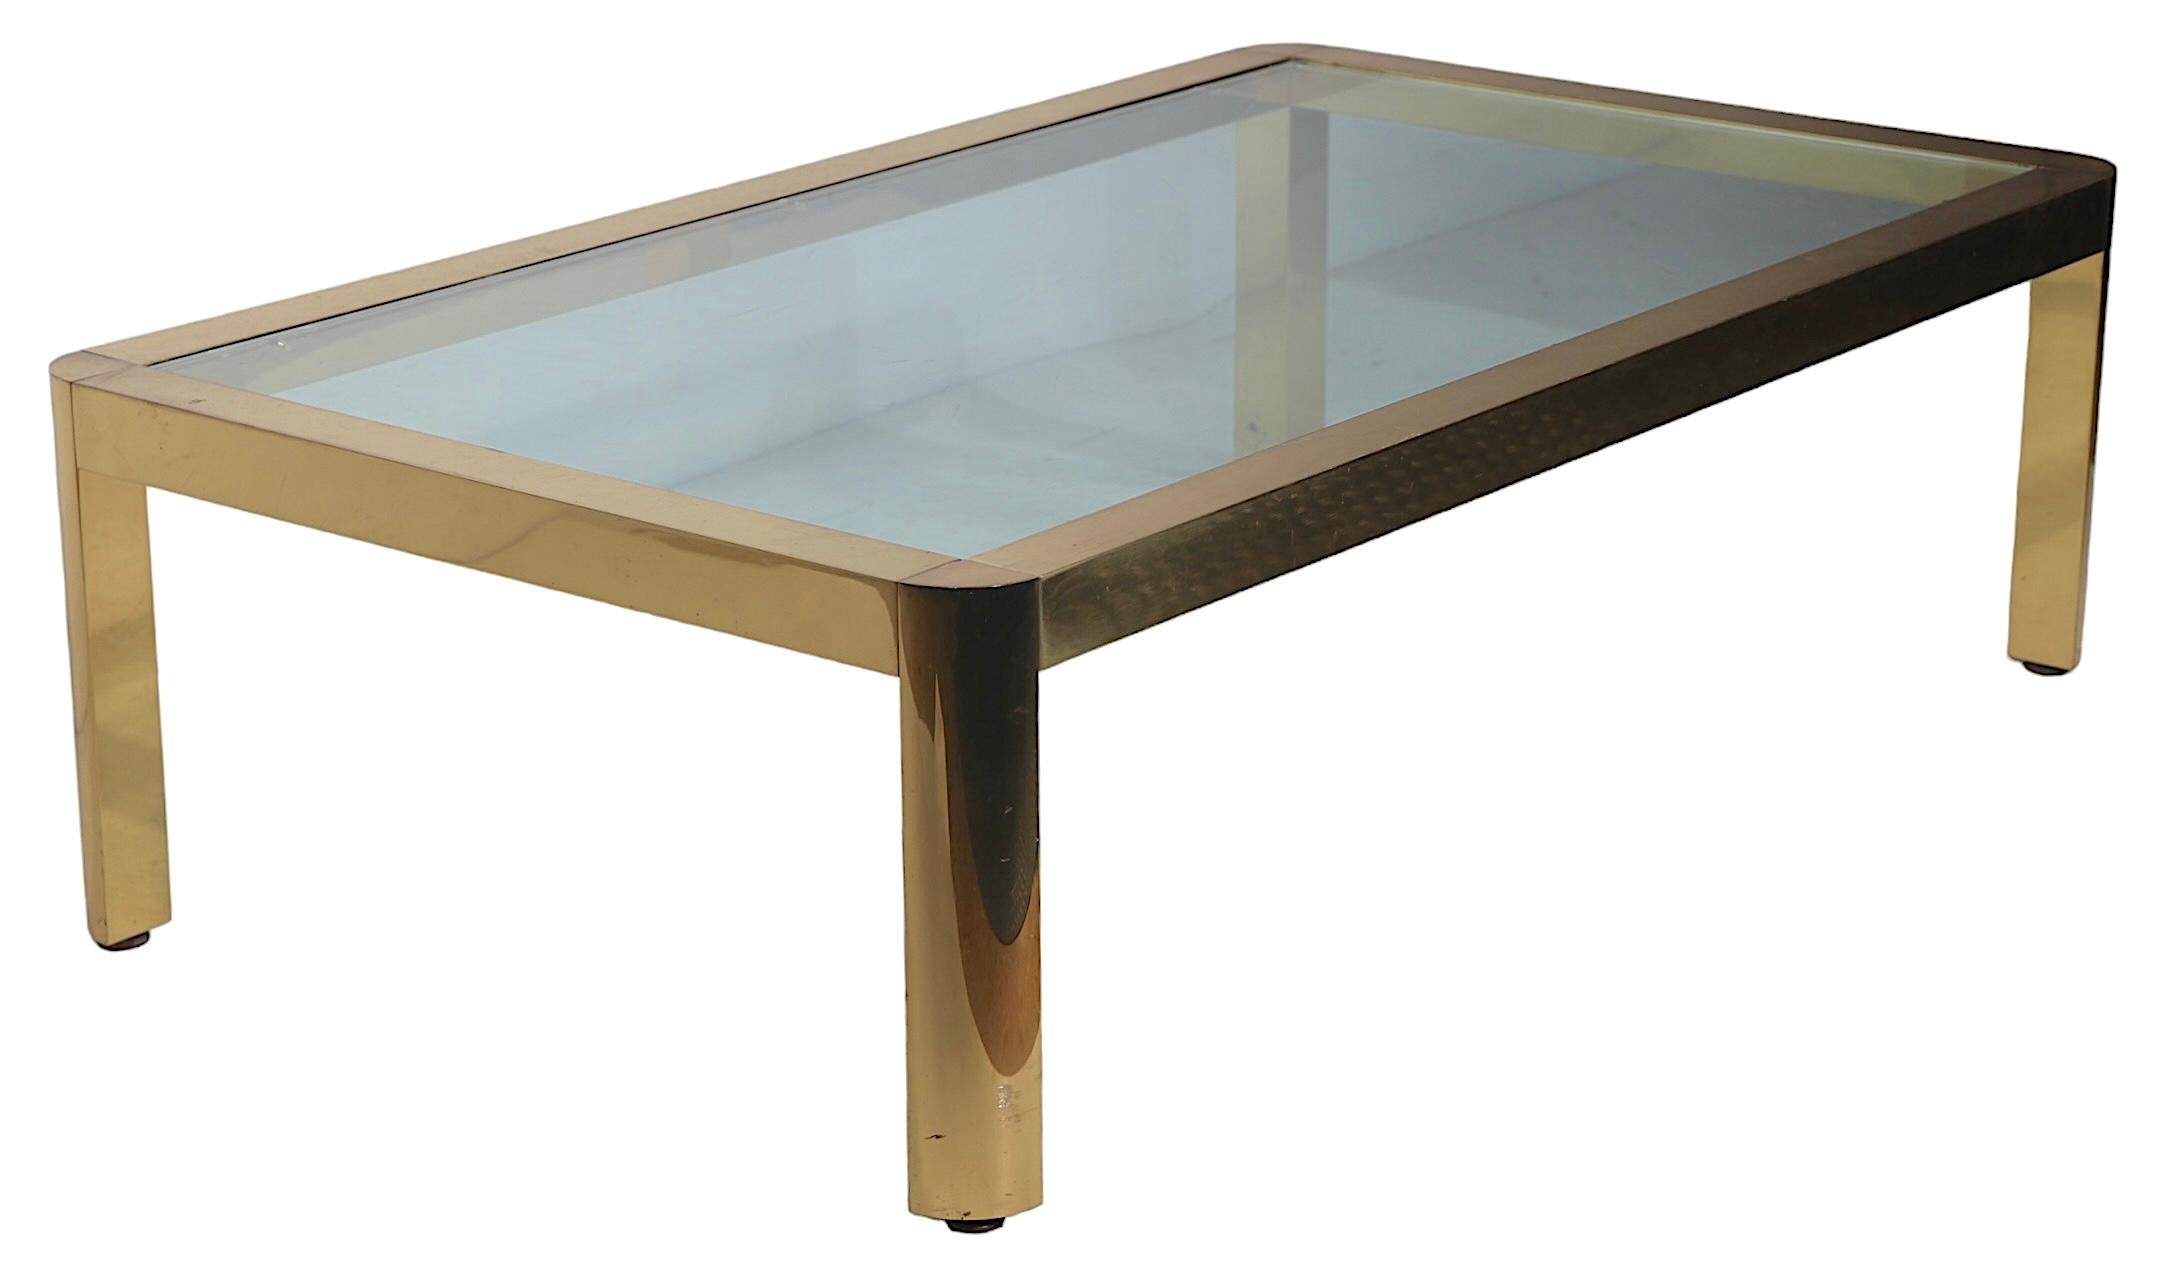 Post-Modern Postmodern Hollywood Regency Brass and Glass Coffee Table Made in Italy c 1970's For Sale